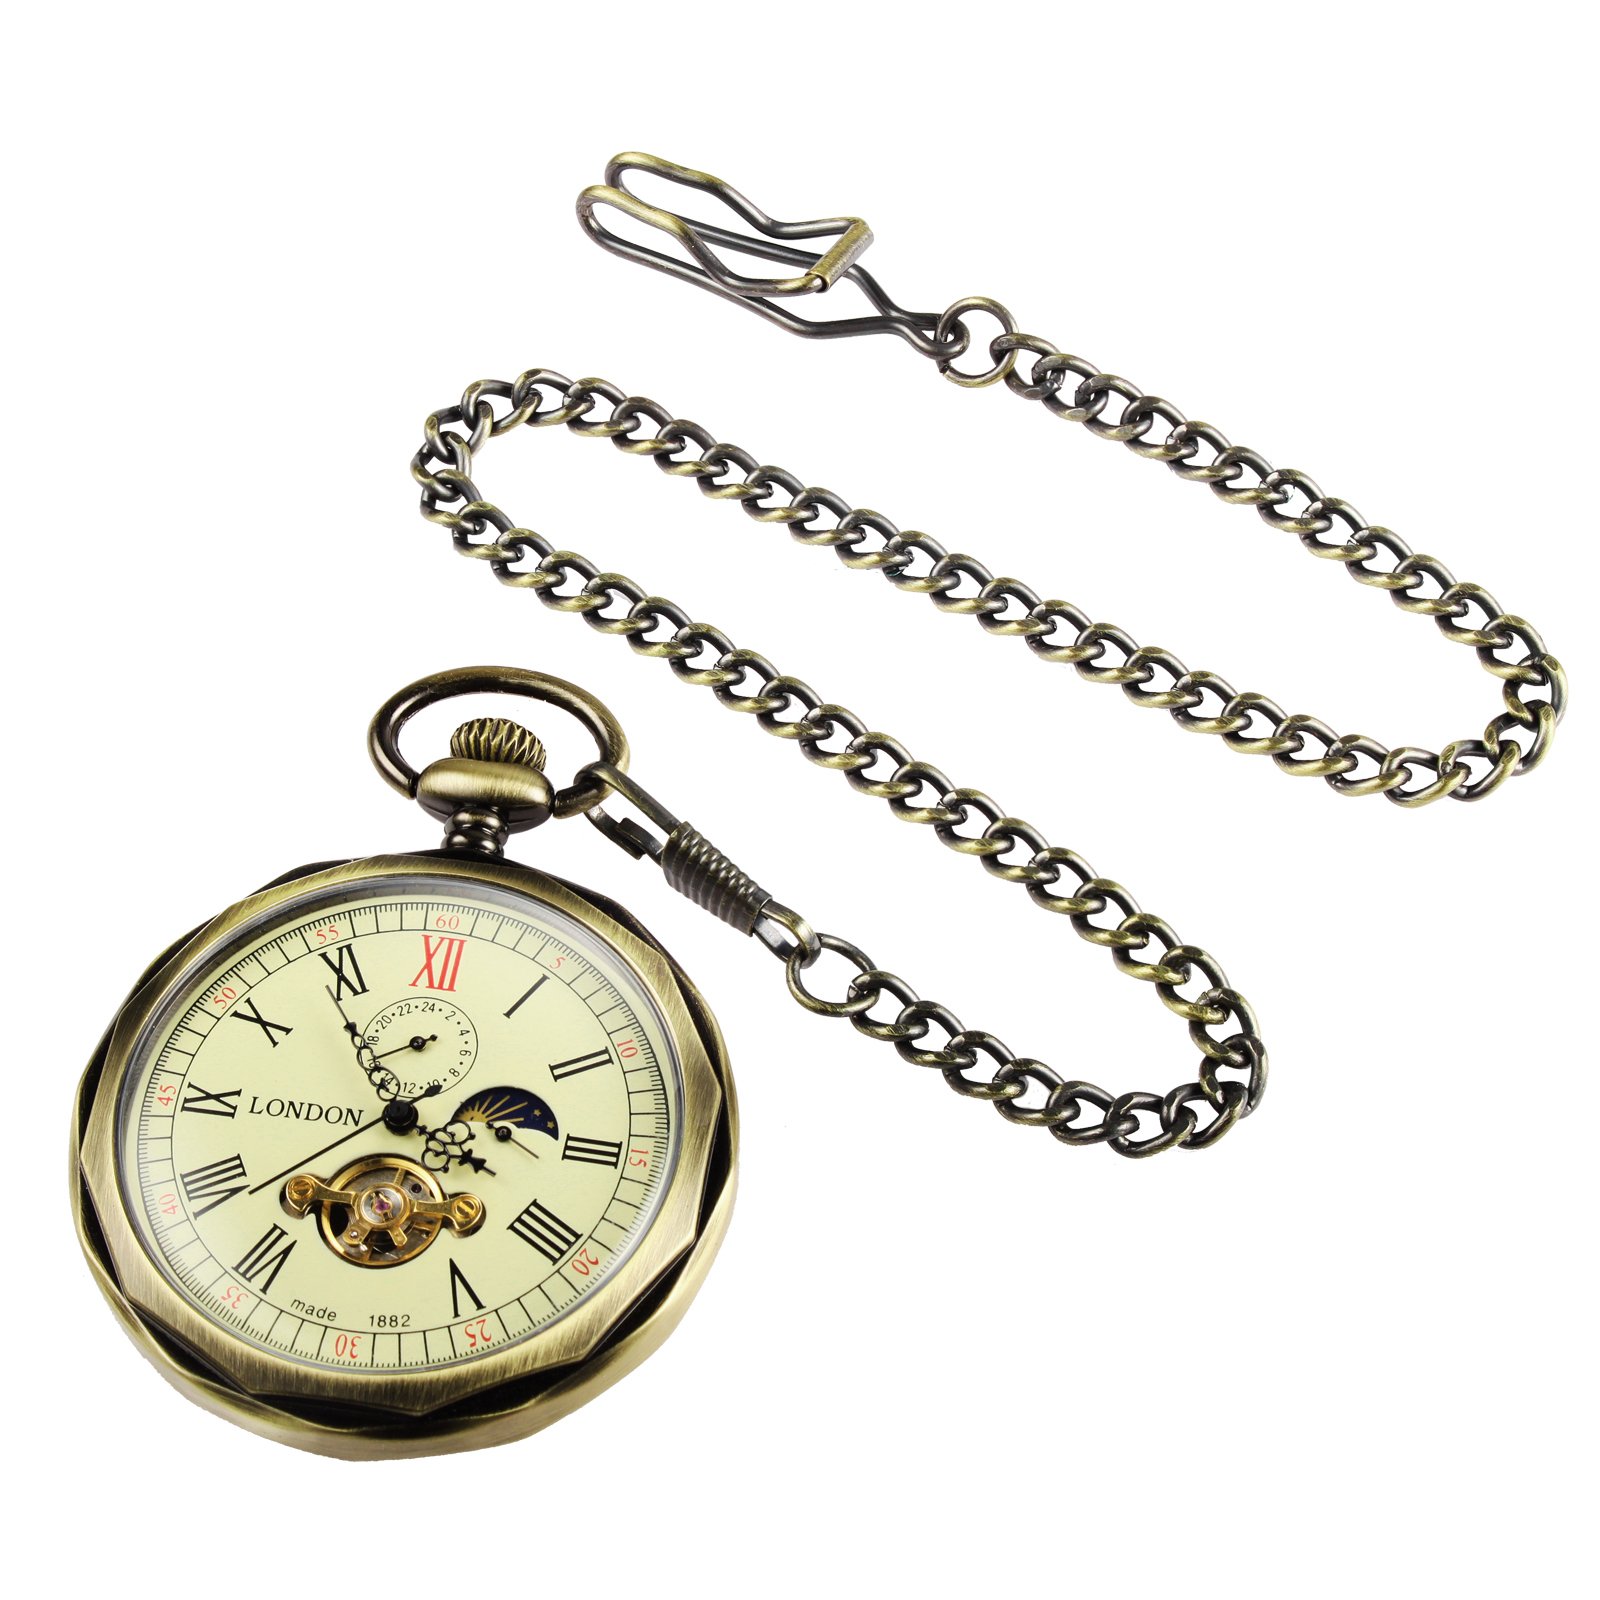 TREEWETO Mechanical Pocket Watches Roman Numerals Open Face with Chain Men 24-Hour Moon Sun + Box